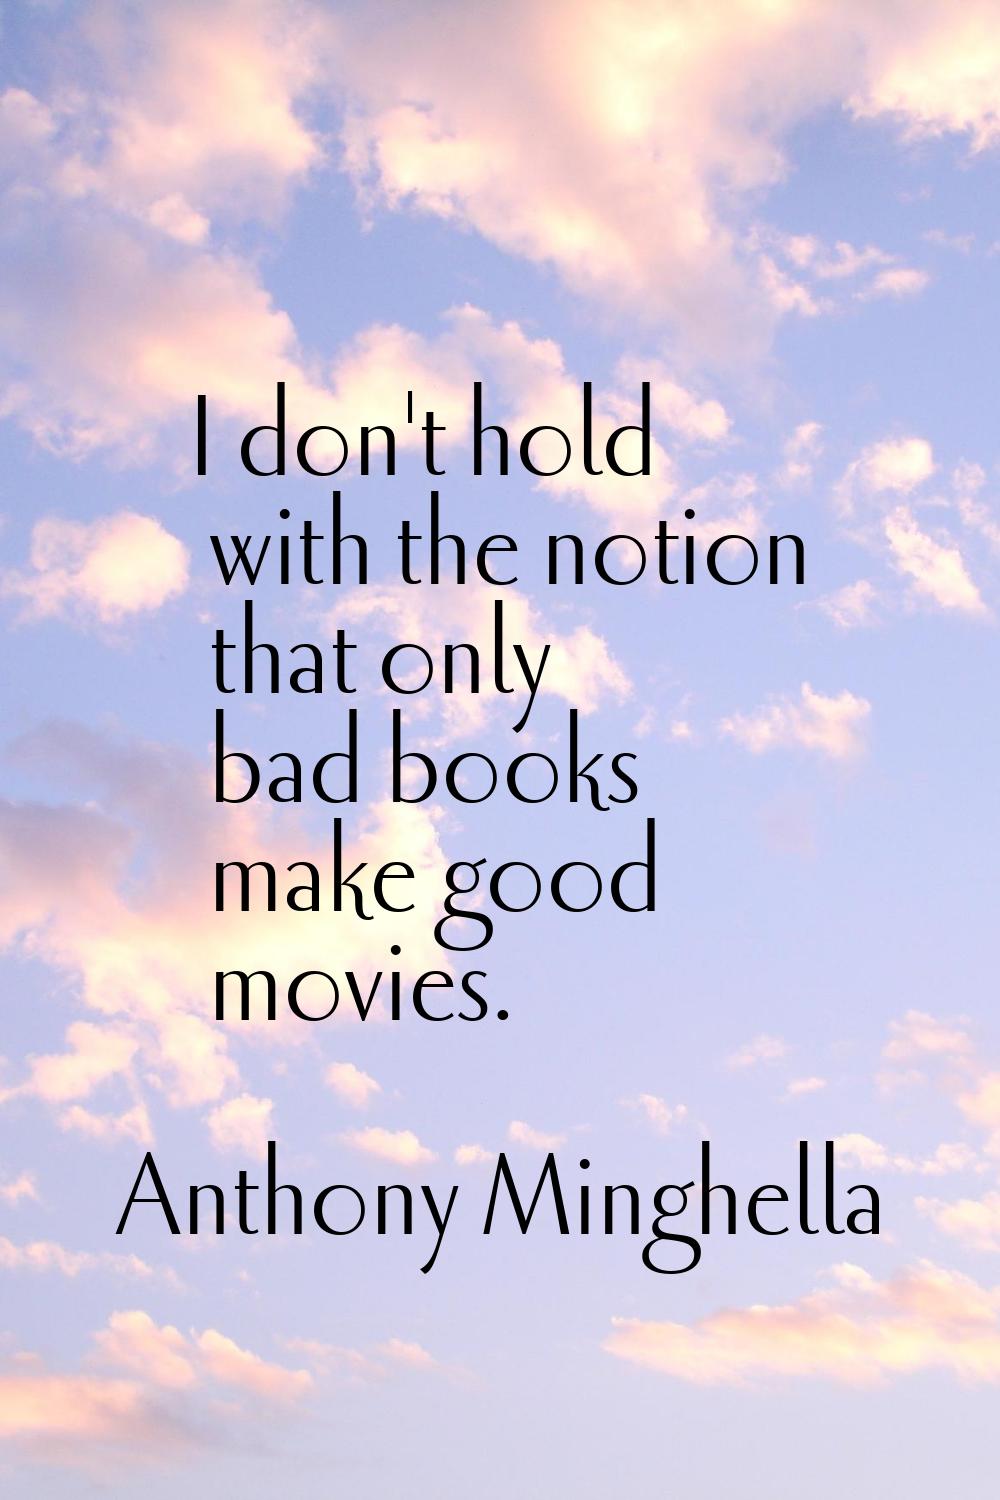 I don't hold with the notion that only bad books make good movies.